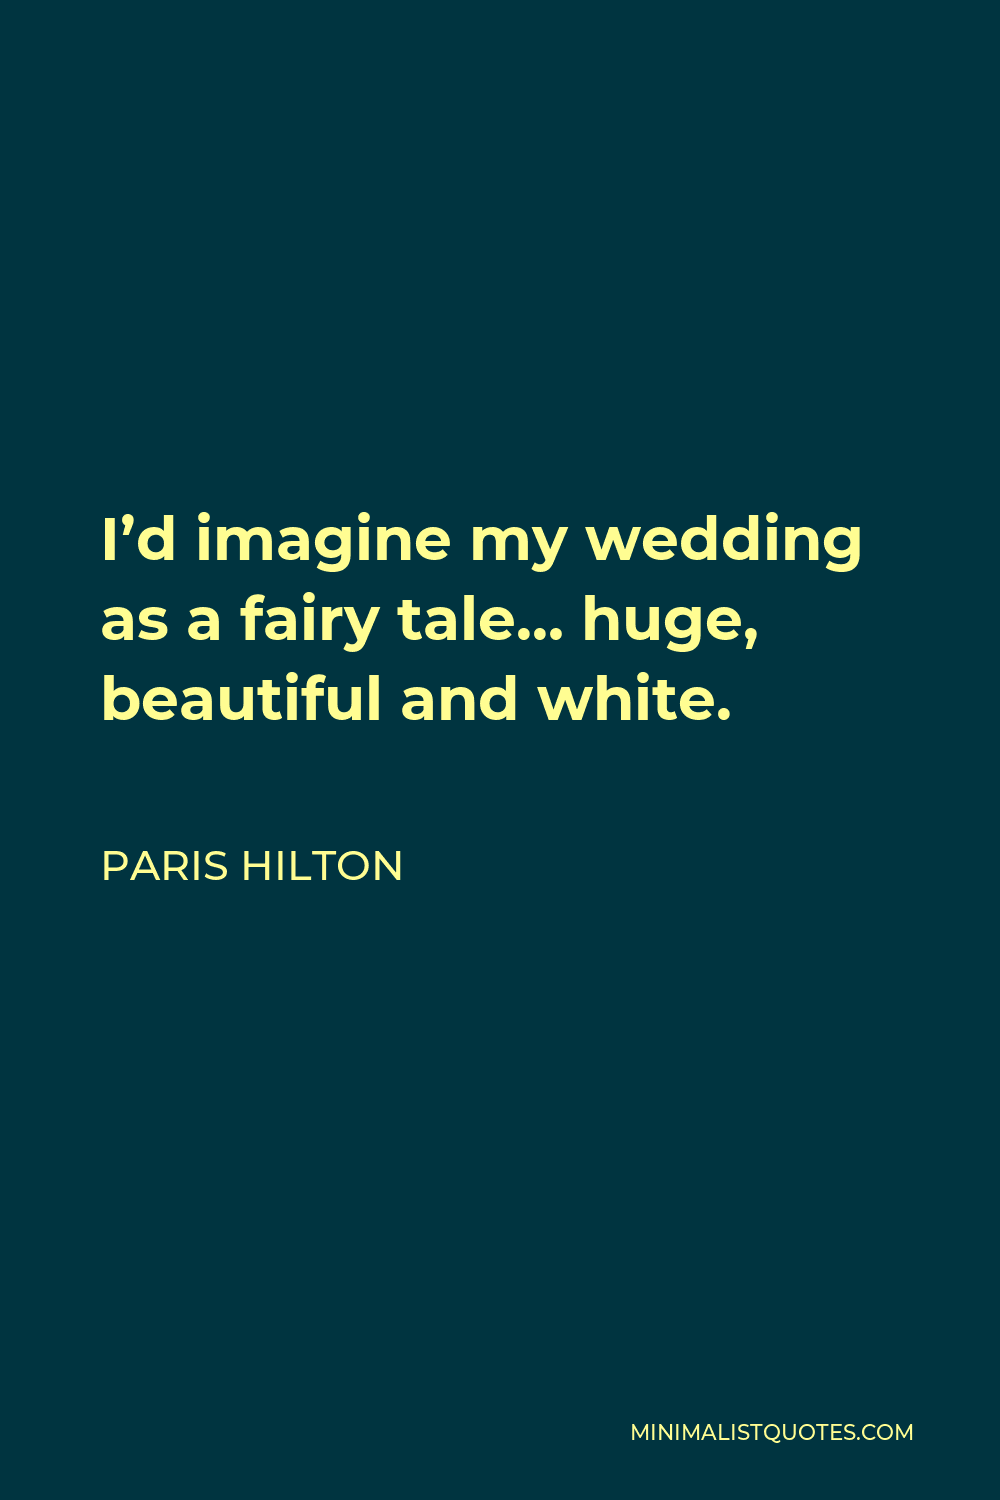 Paris Hilton Quote - I’d imagine my wedding as a fairy tale… huge, beautiful and white.